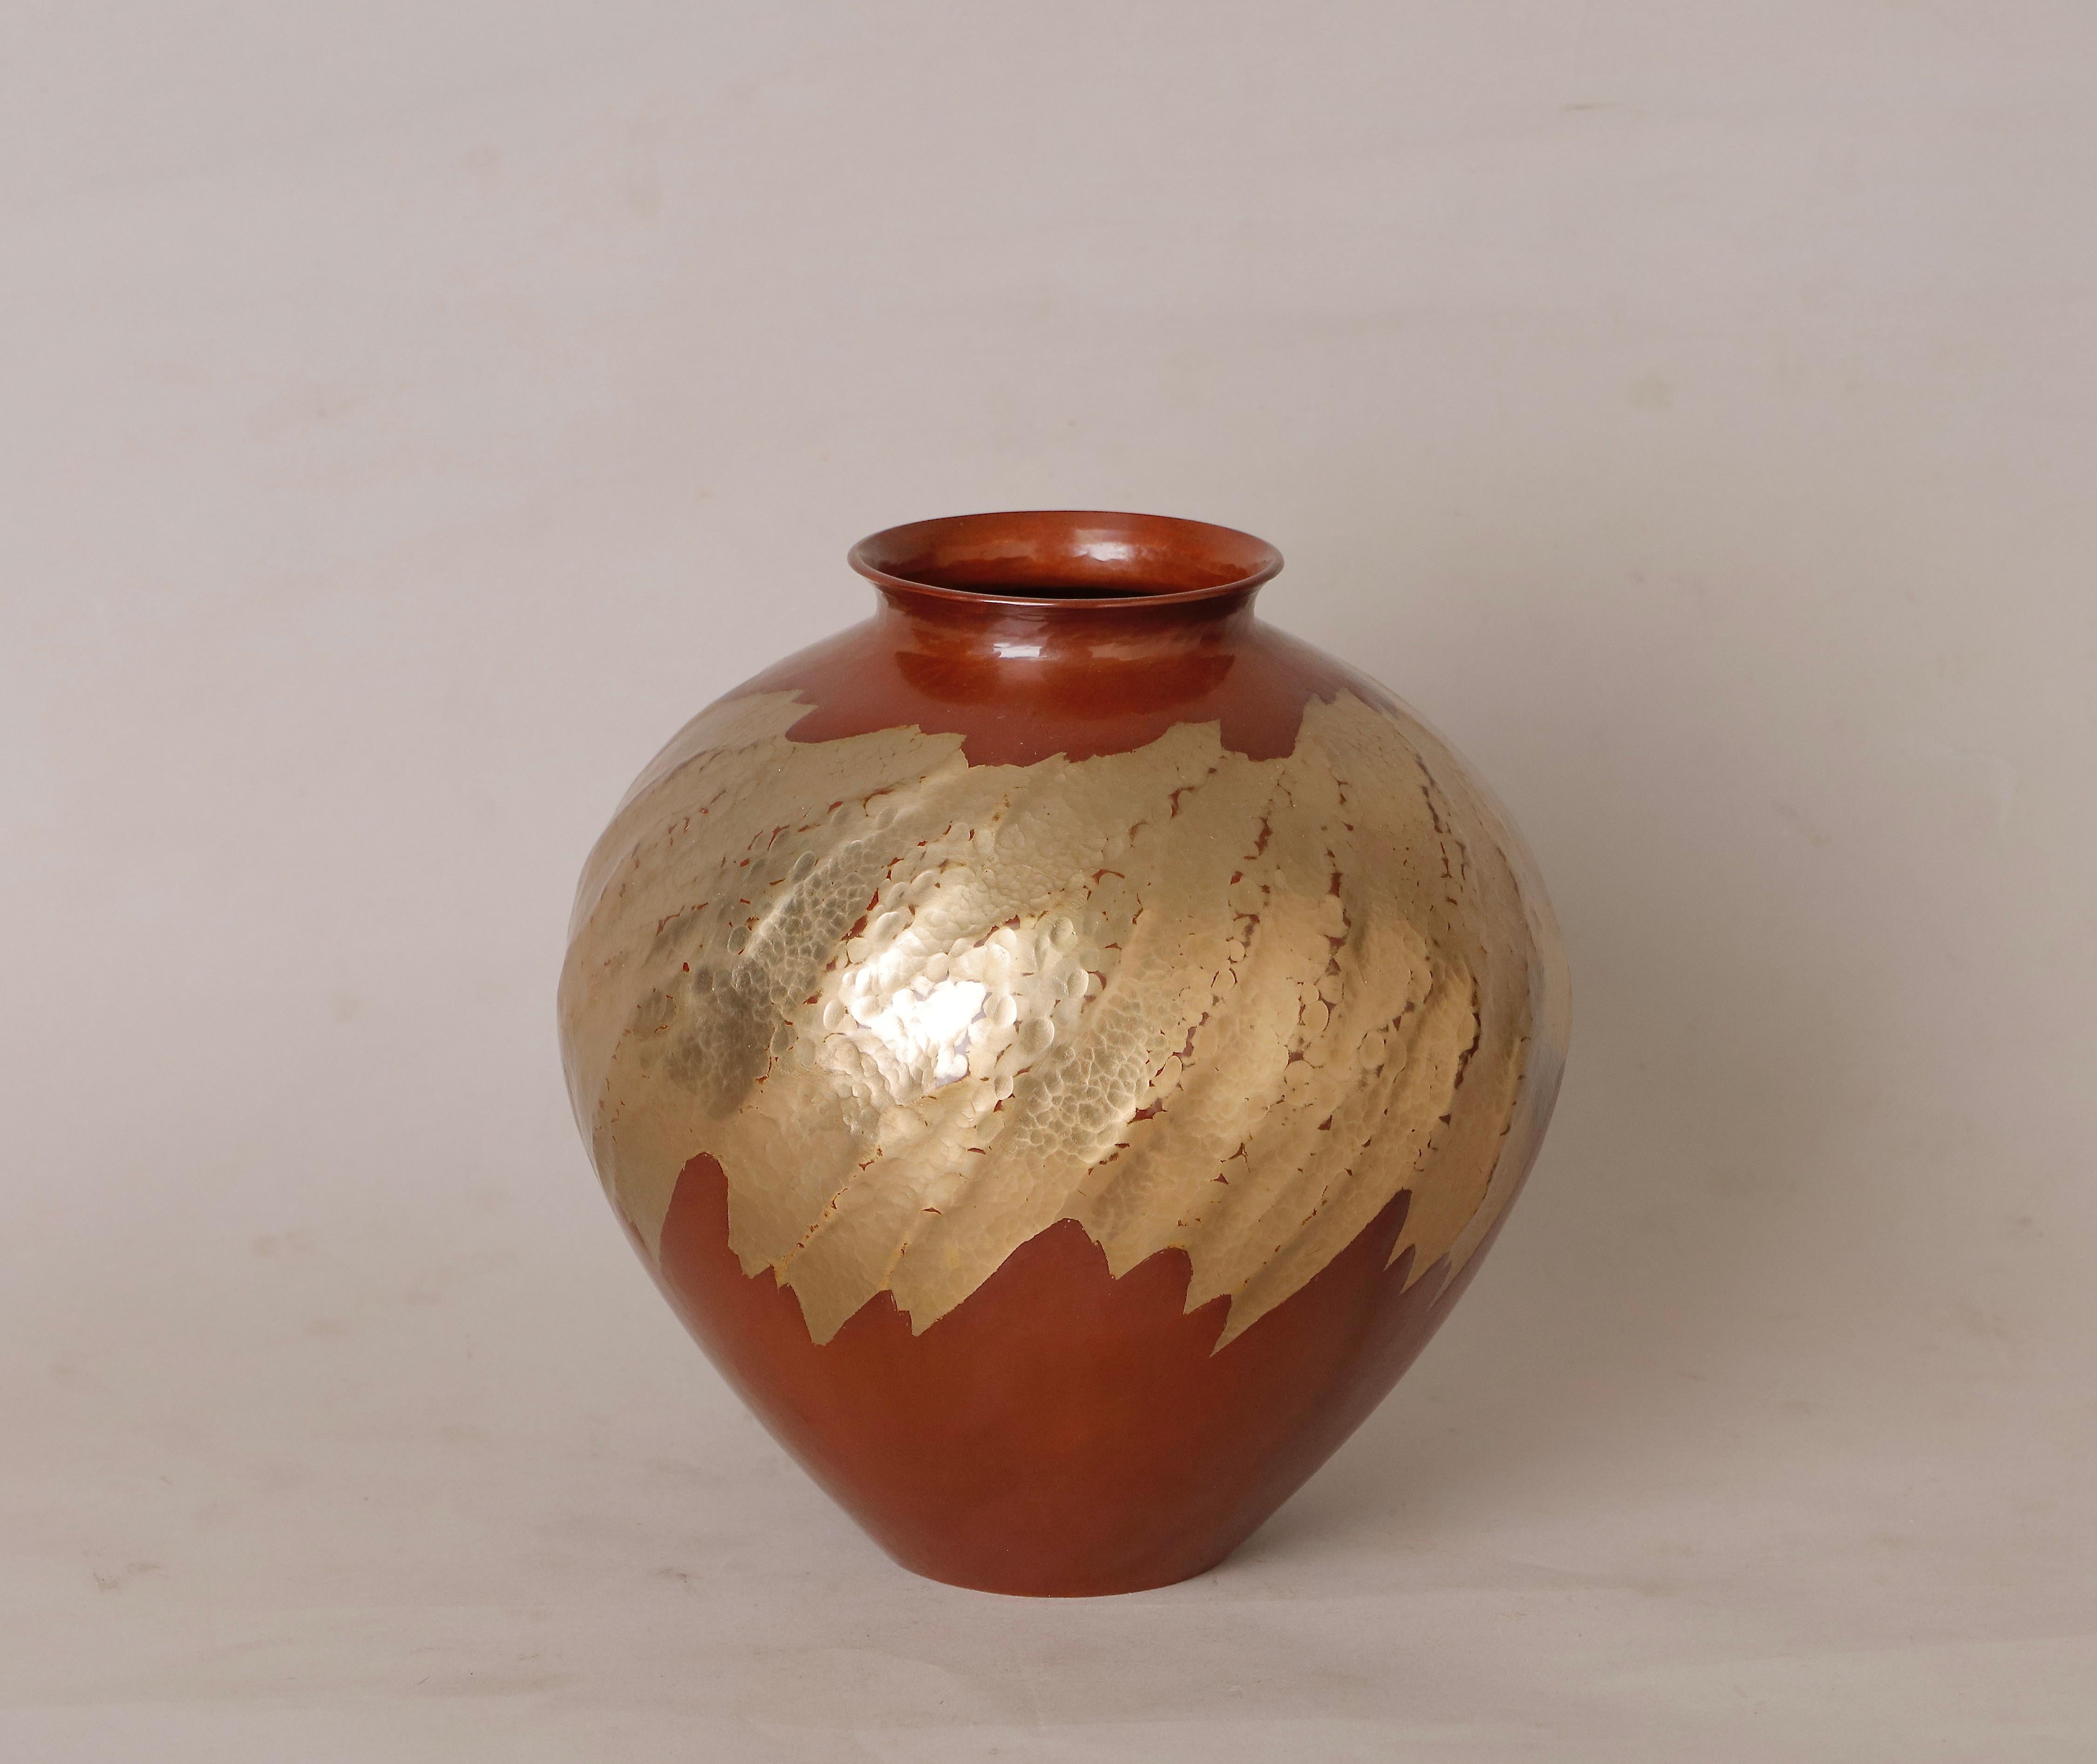 20th Century Artisanal Hand-Hammered Copper Vase by Renowned Gyokusendo